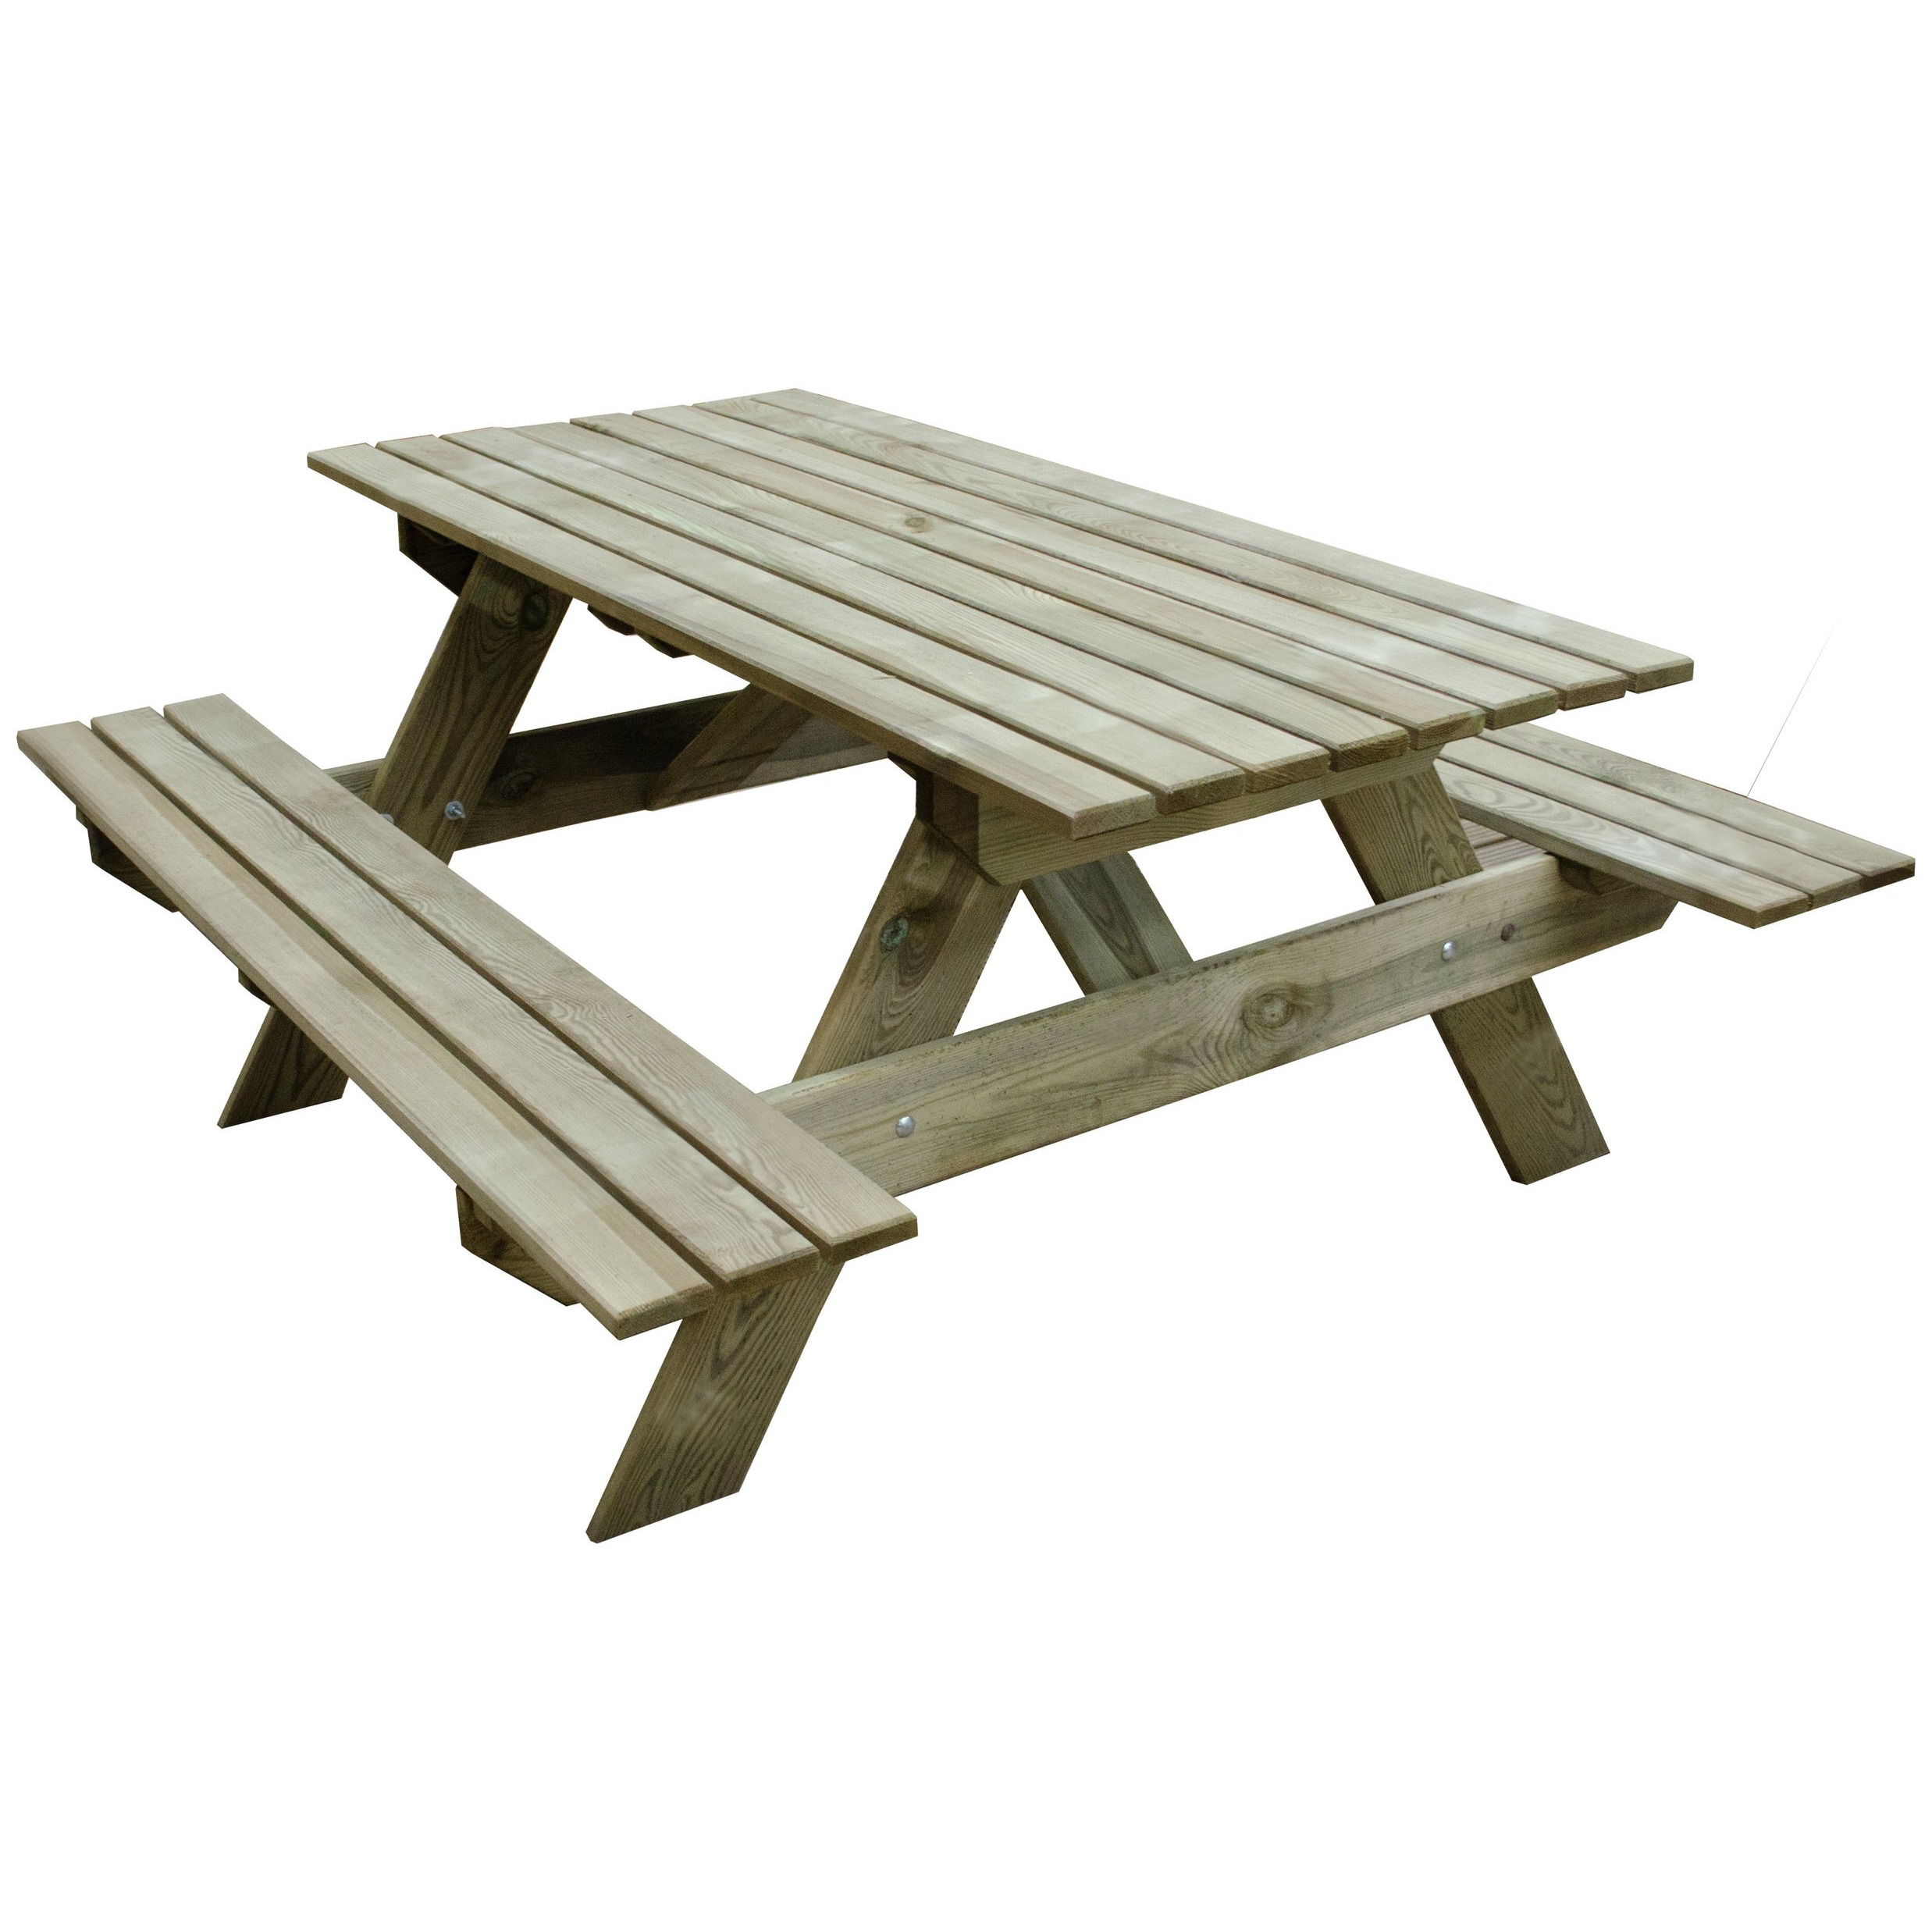 Forest Garden 4 Seater Wooden Picnic Table - image 1